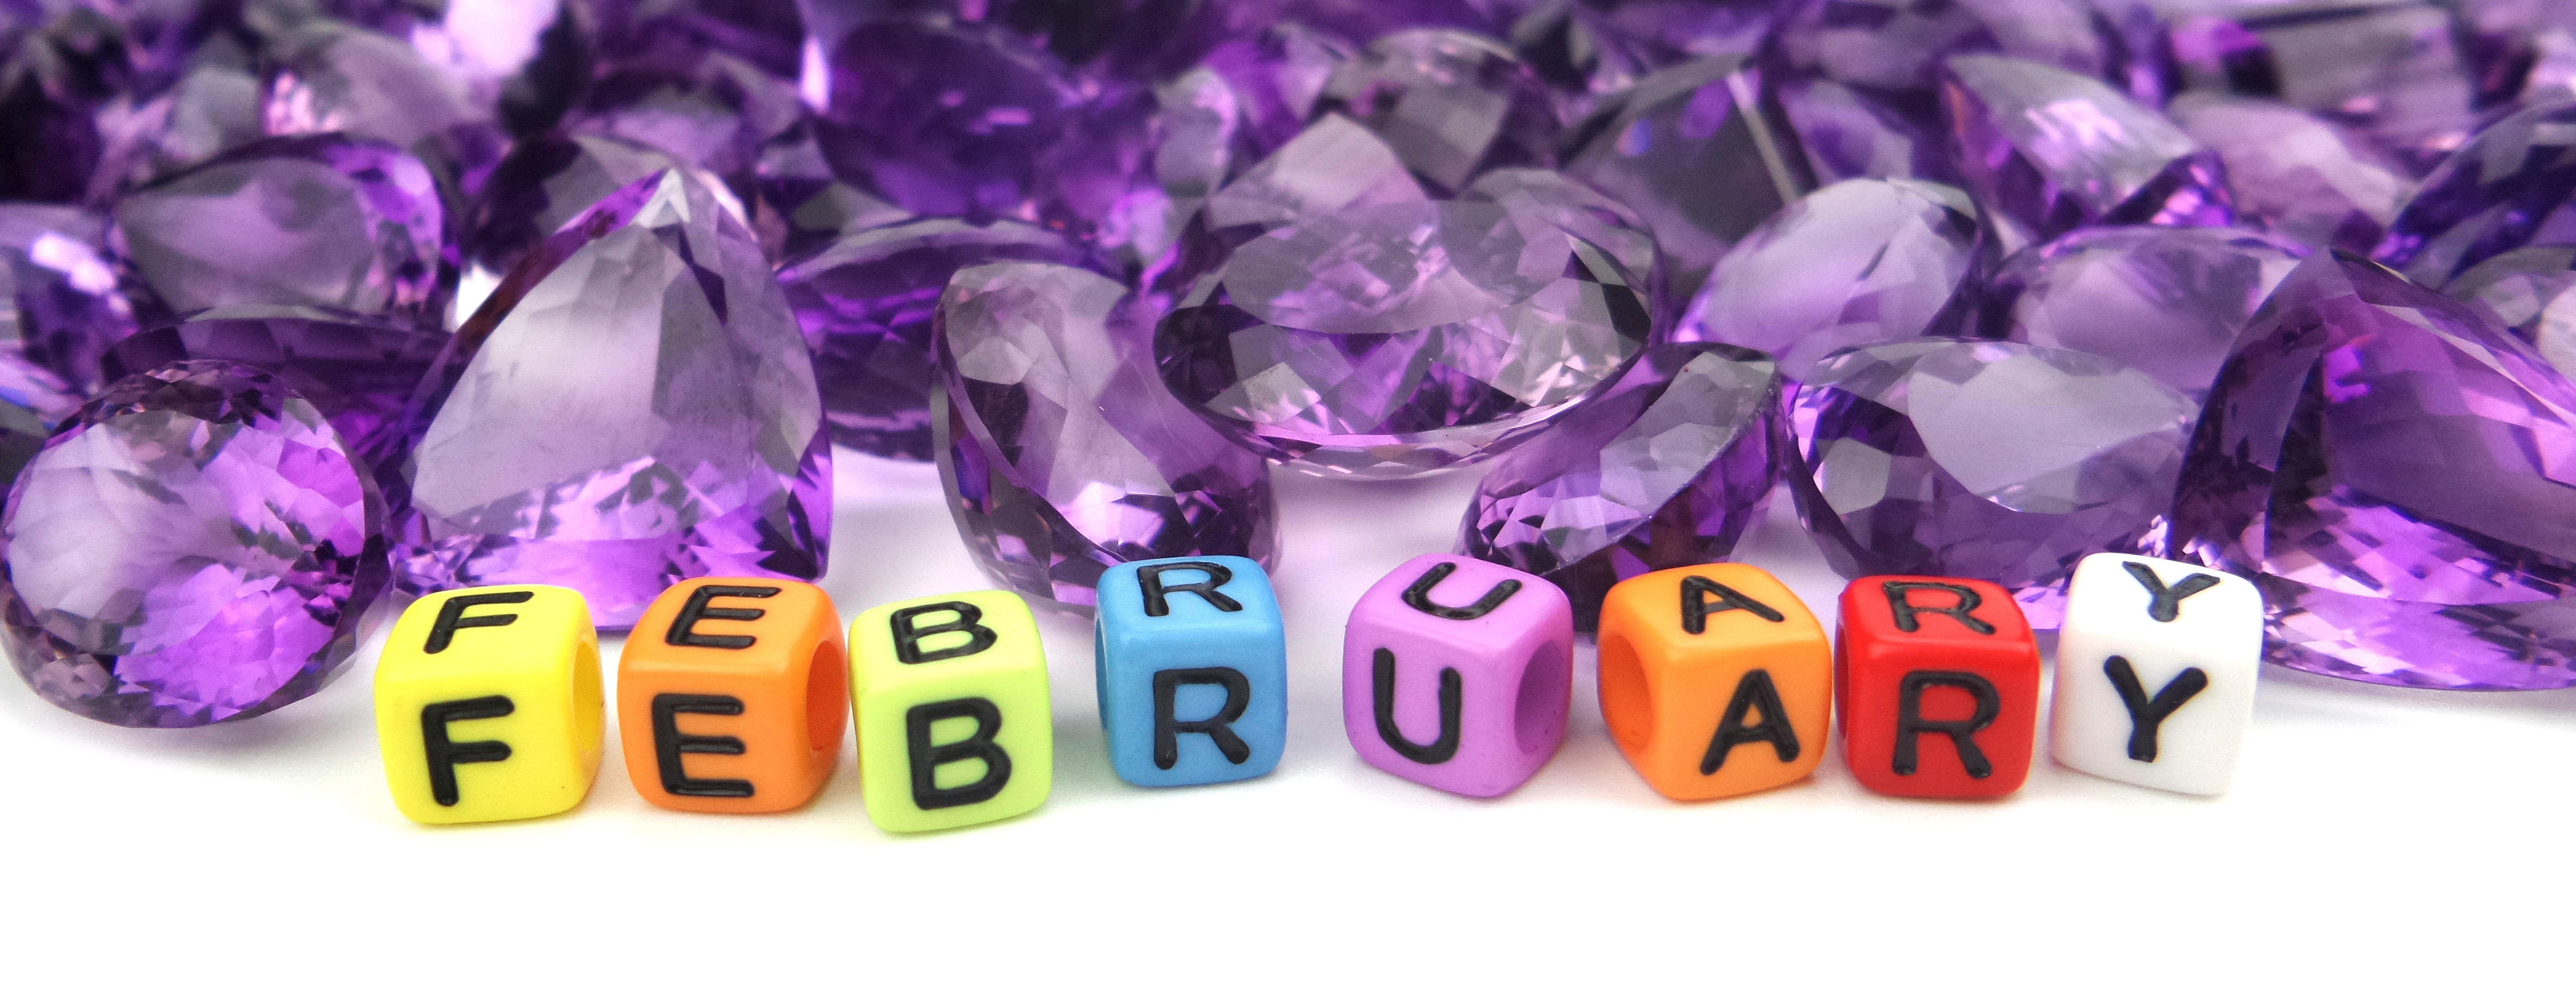 An artistic display of various shaped and sized amethyst crystals on a white background, with the word "FEBRUARY" spelled in colorful bead letters.